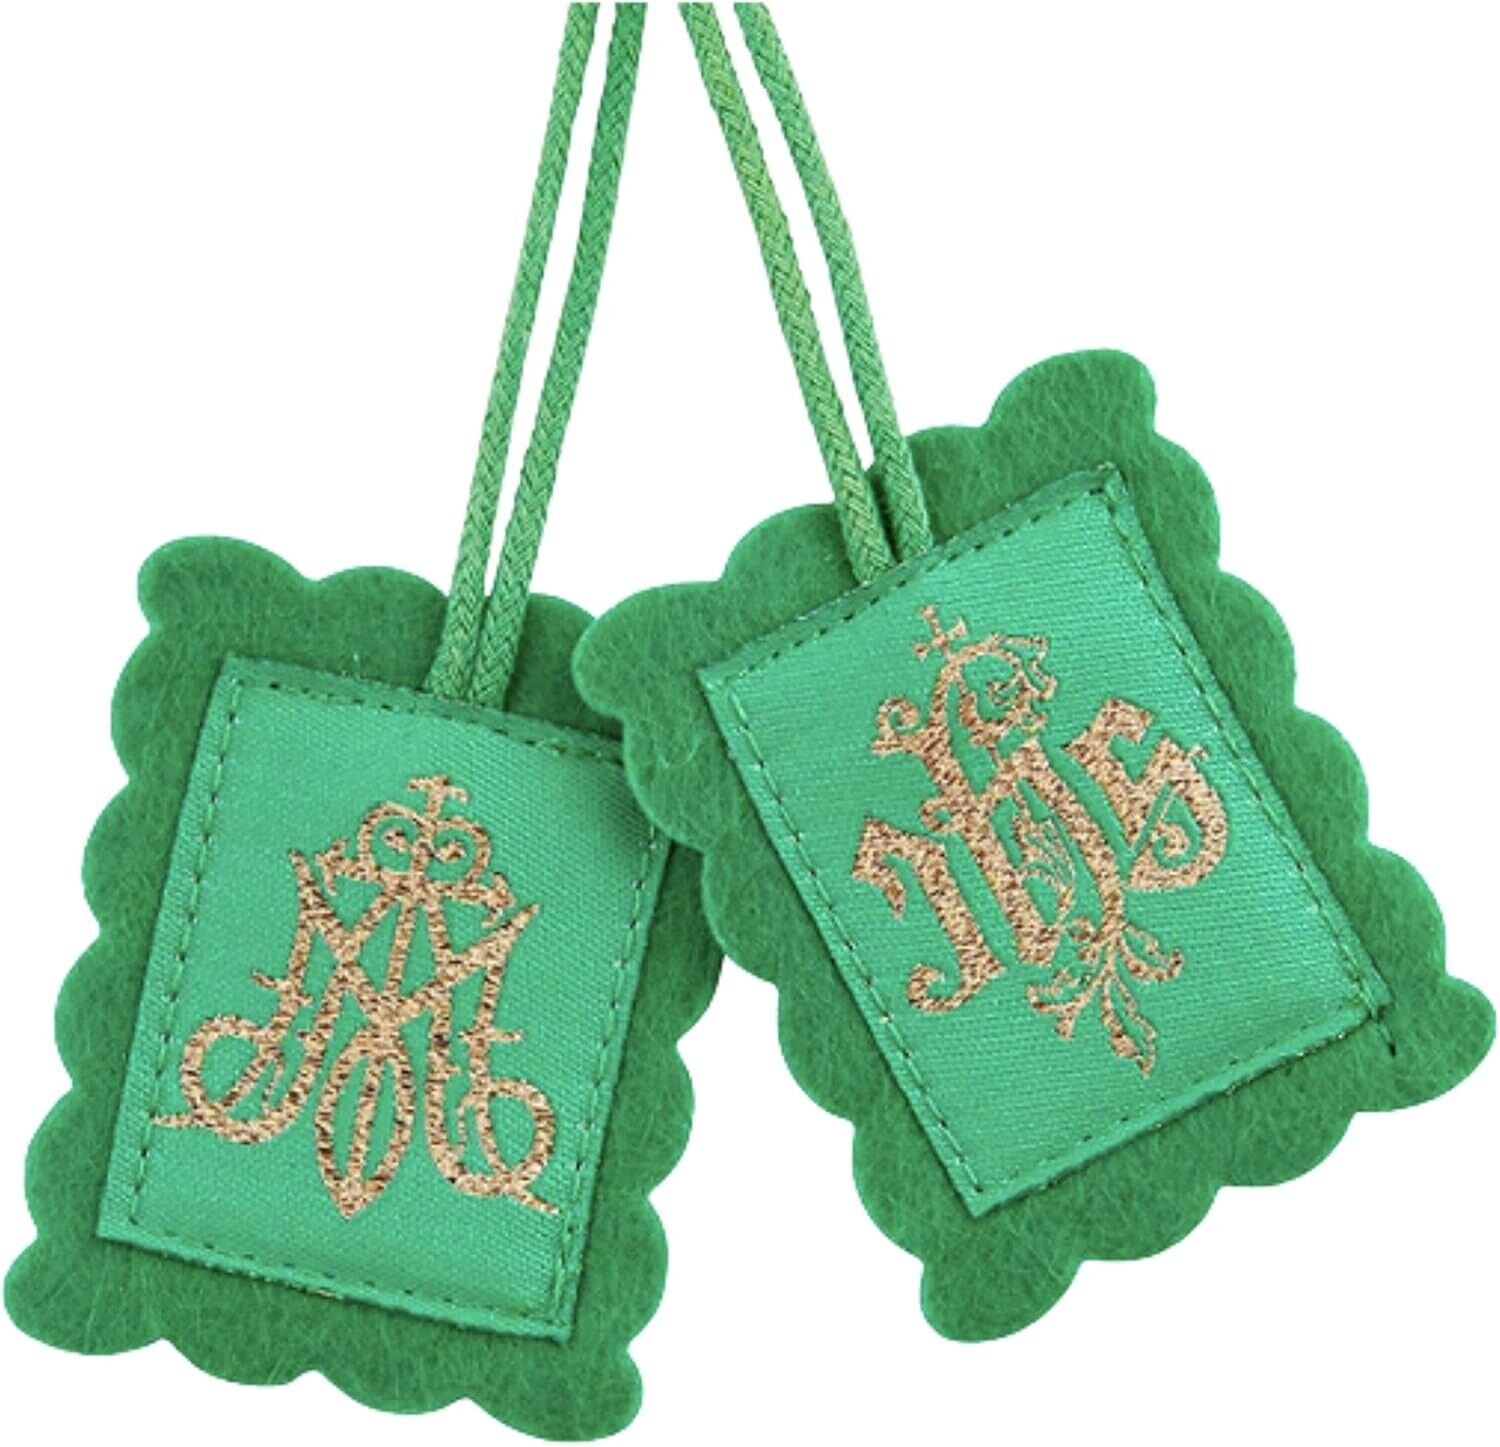 (2 pack) Deluxe Embroidered Green Felt Scapular Necklace Catholic Christian